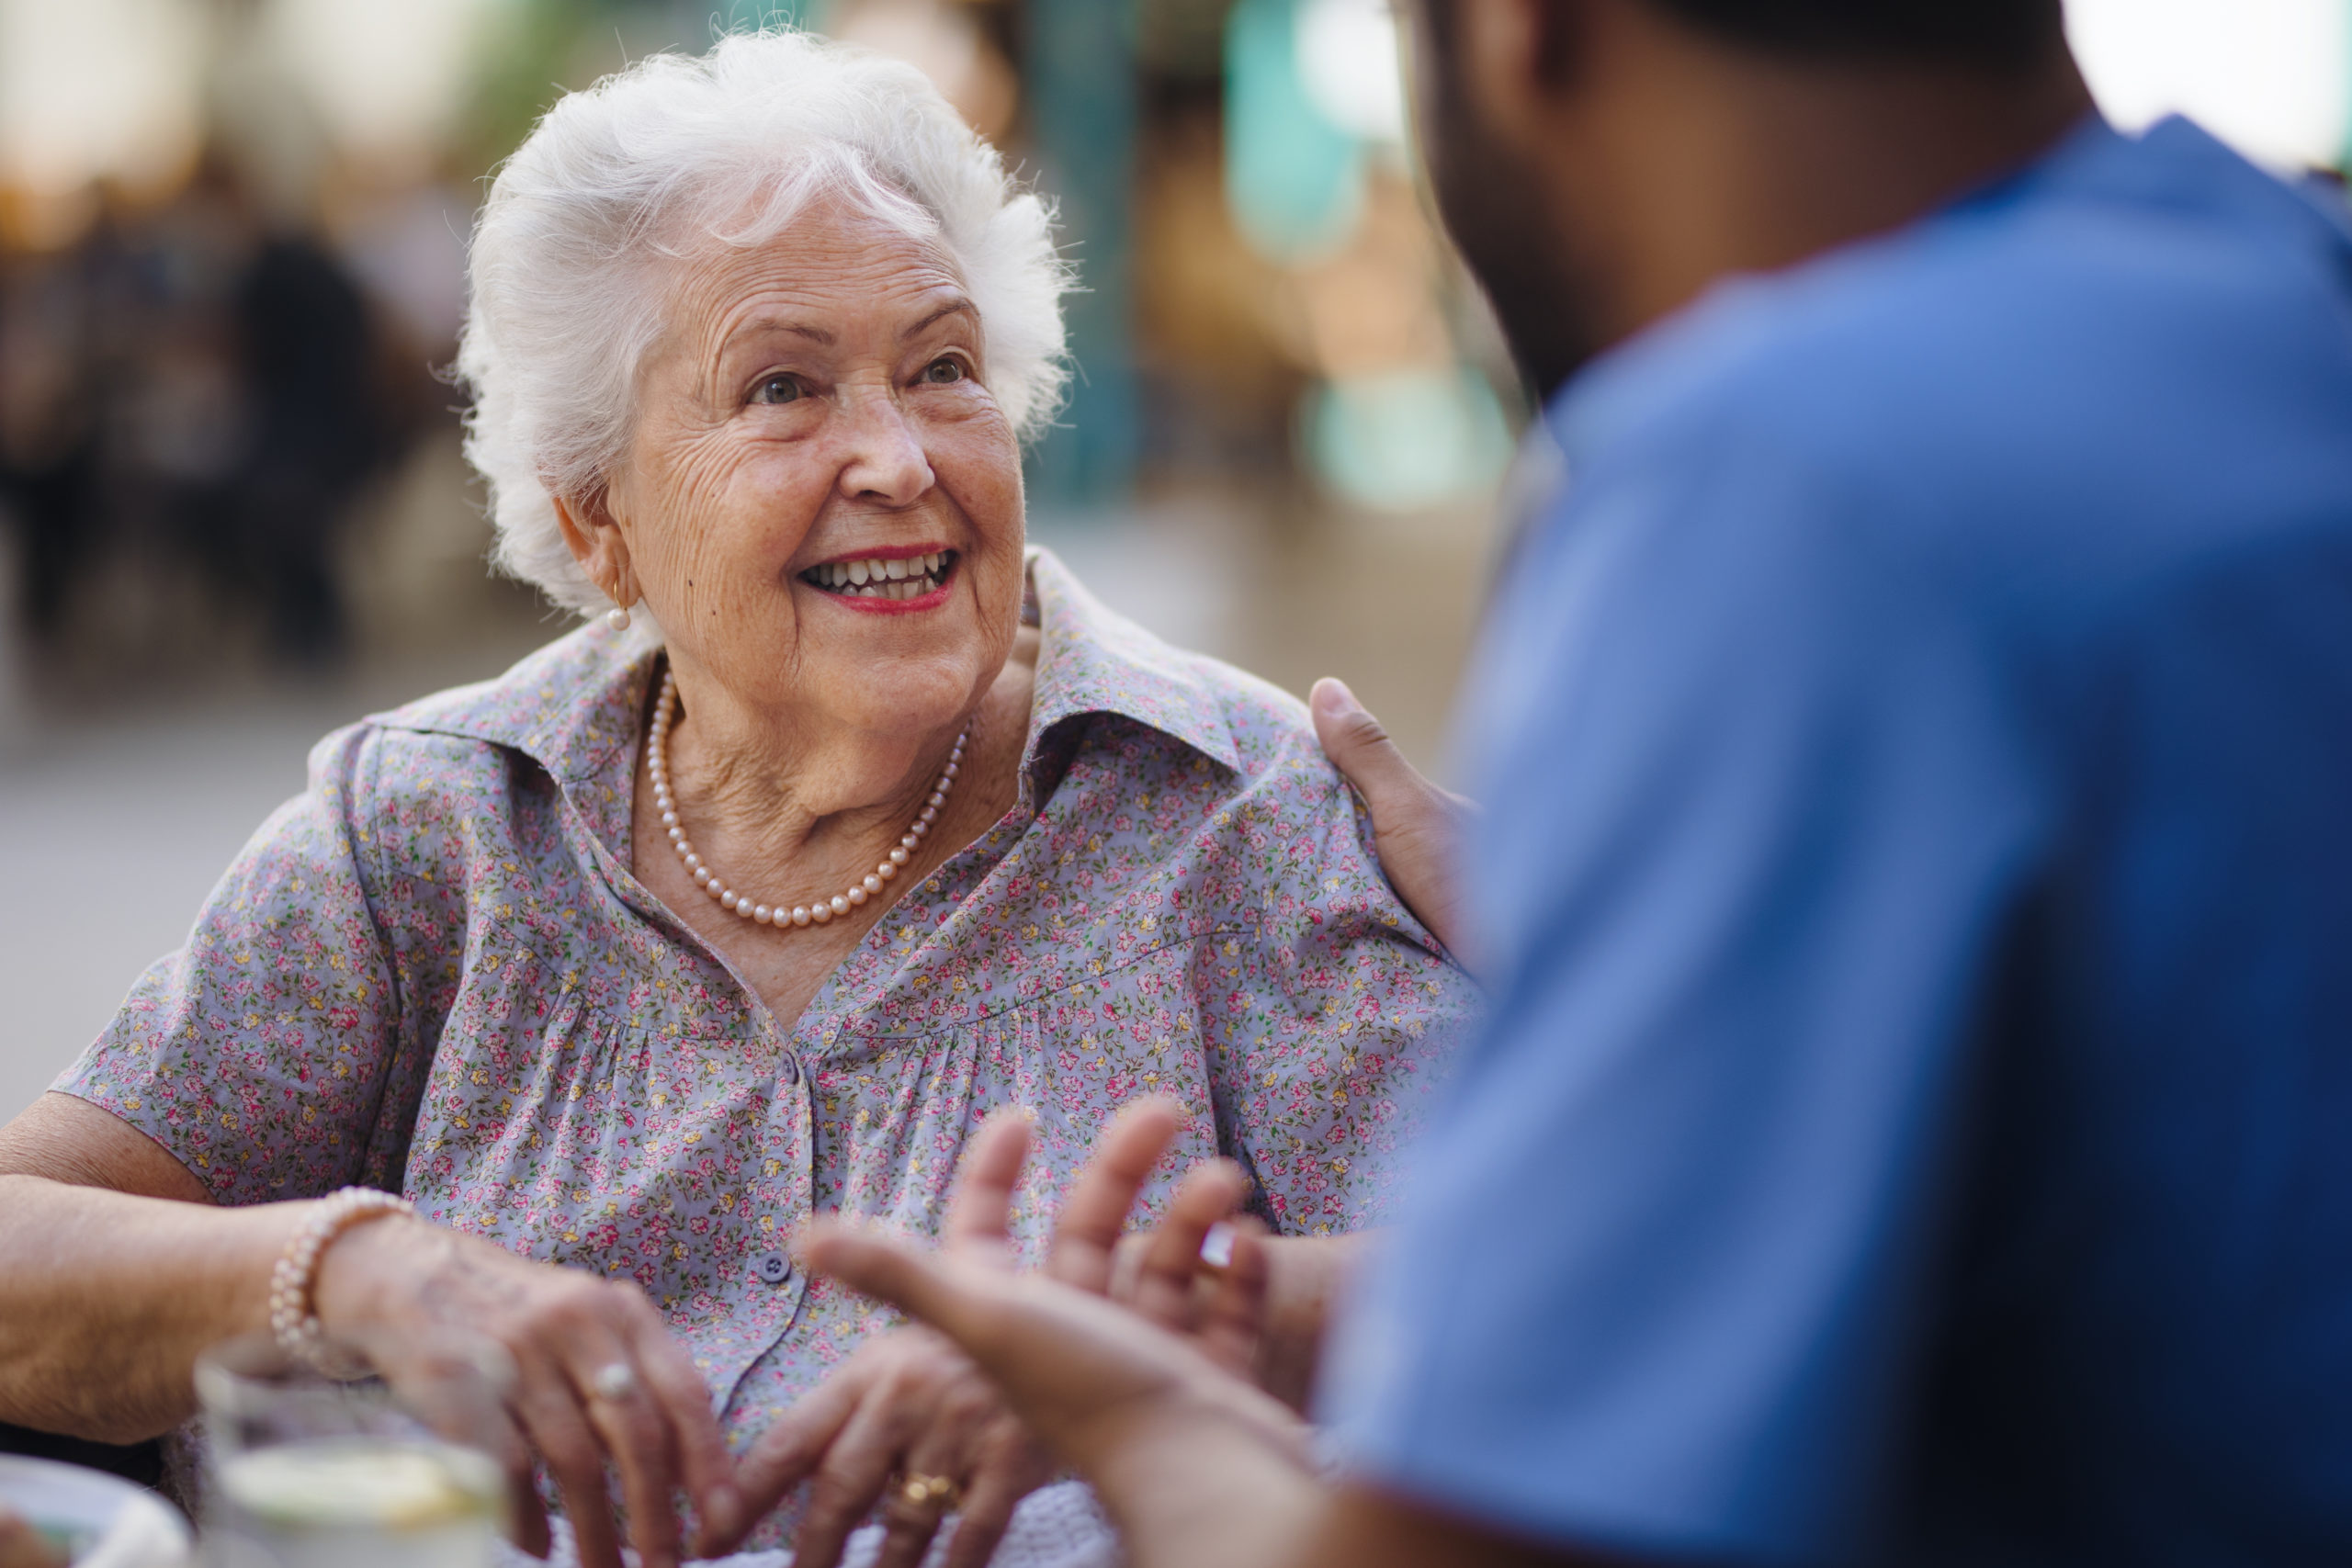 Long-term Care and Skilled Nursing Care: Which Is the Best Option for Your Loved One?